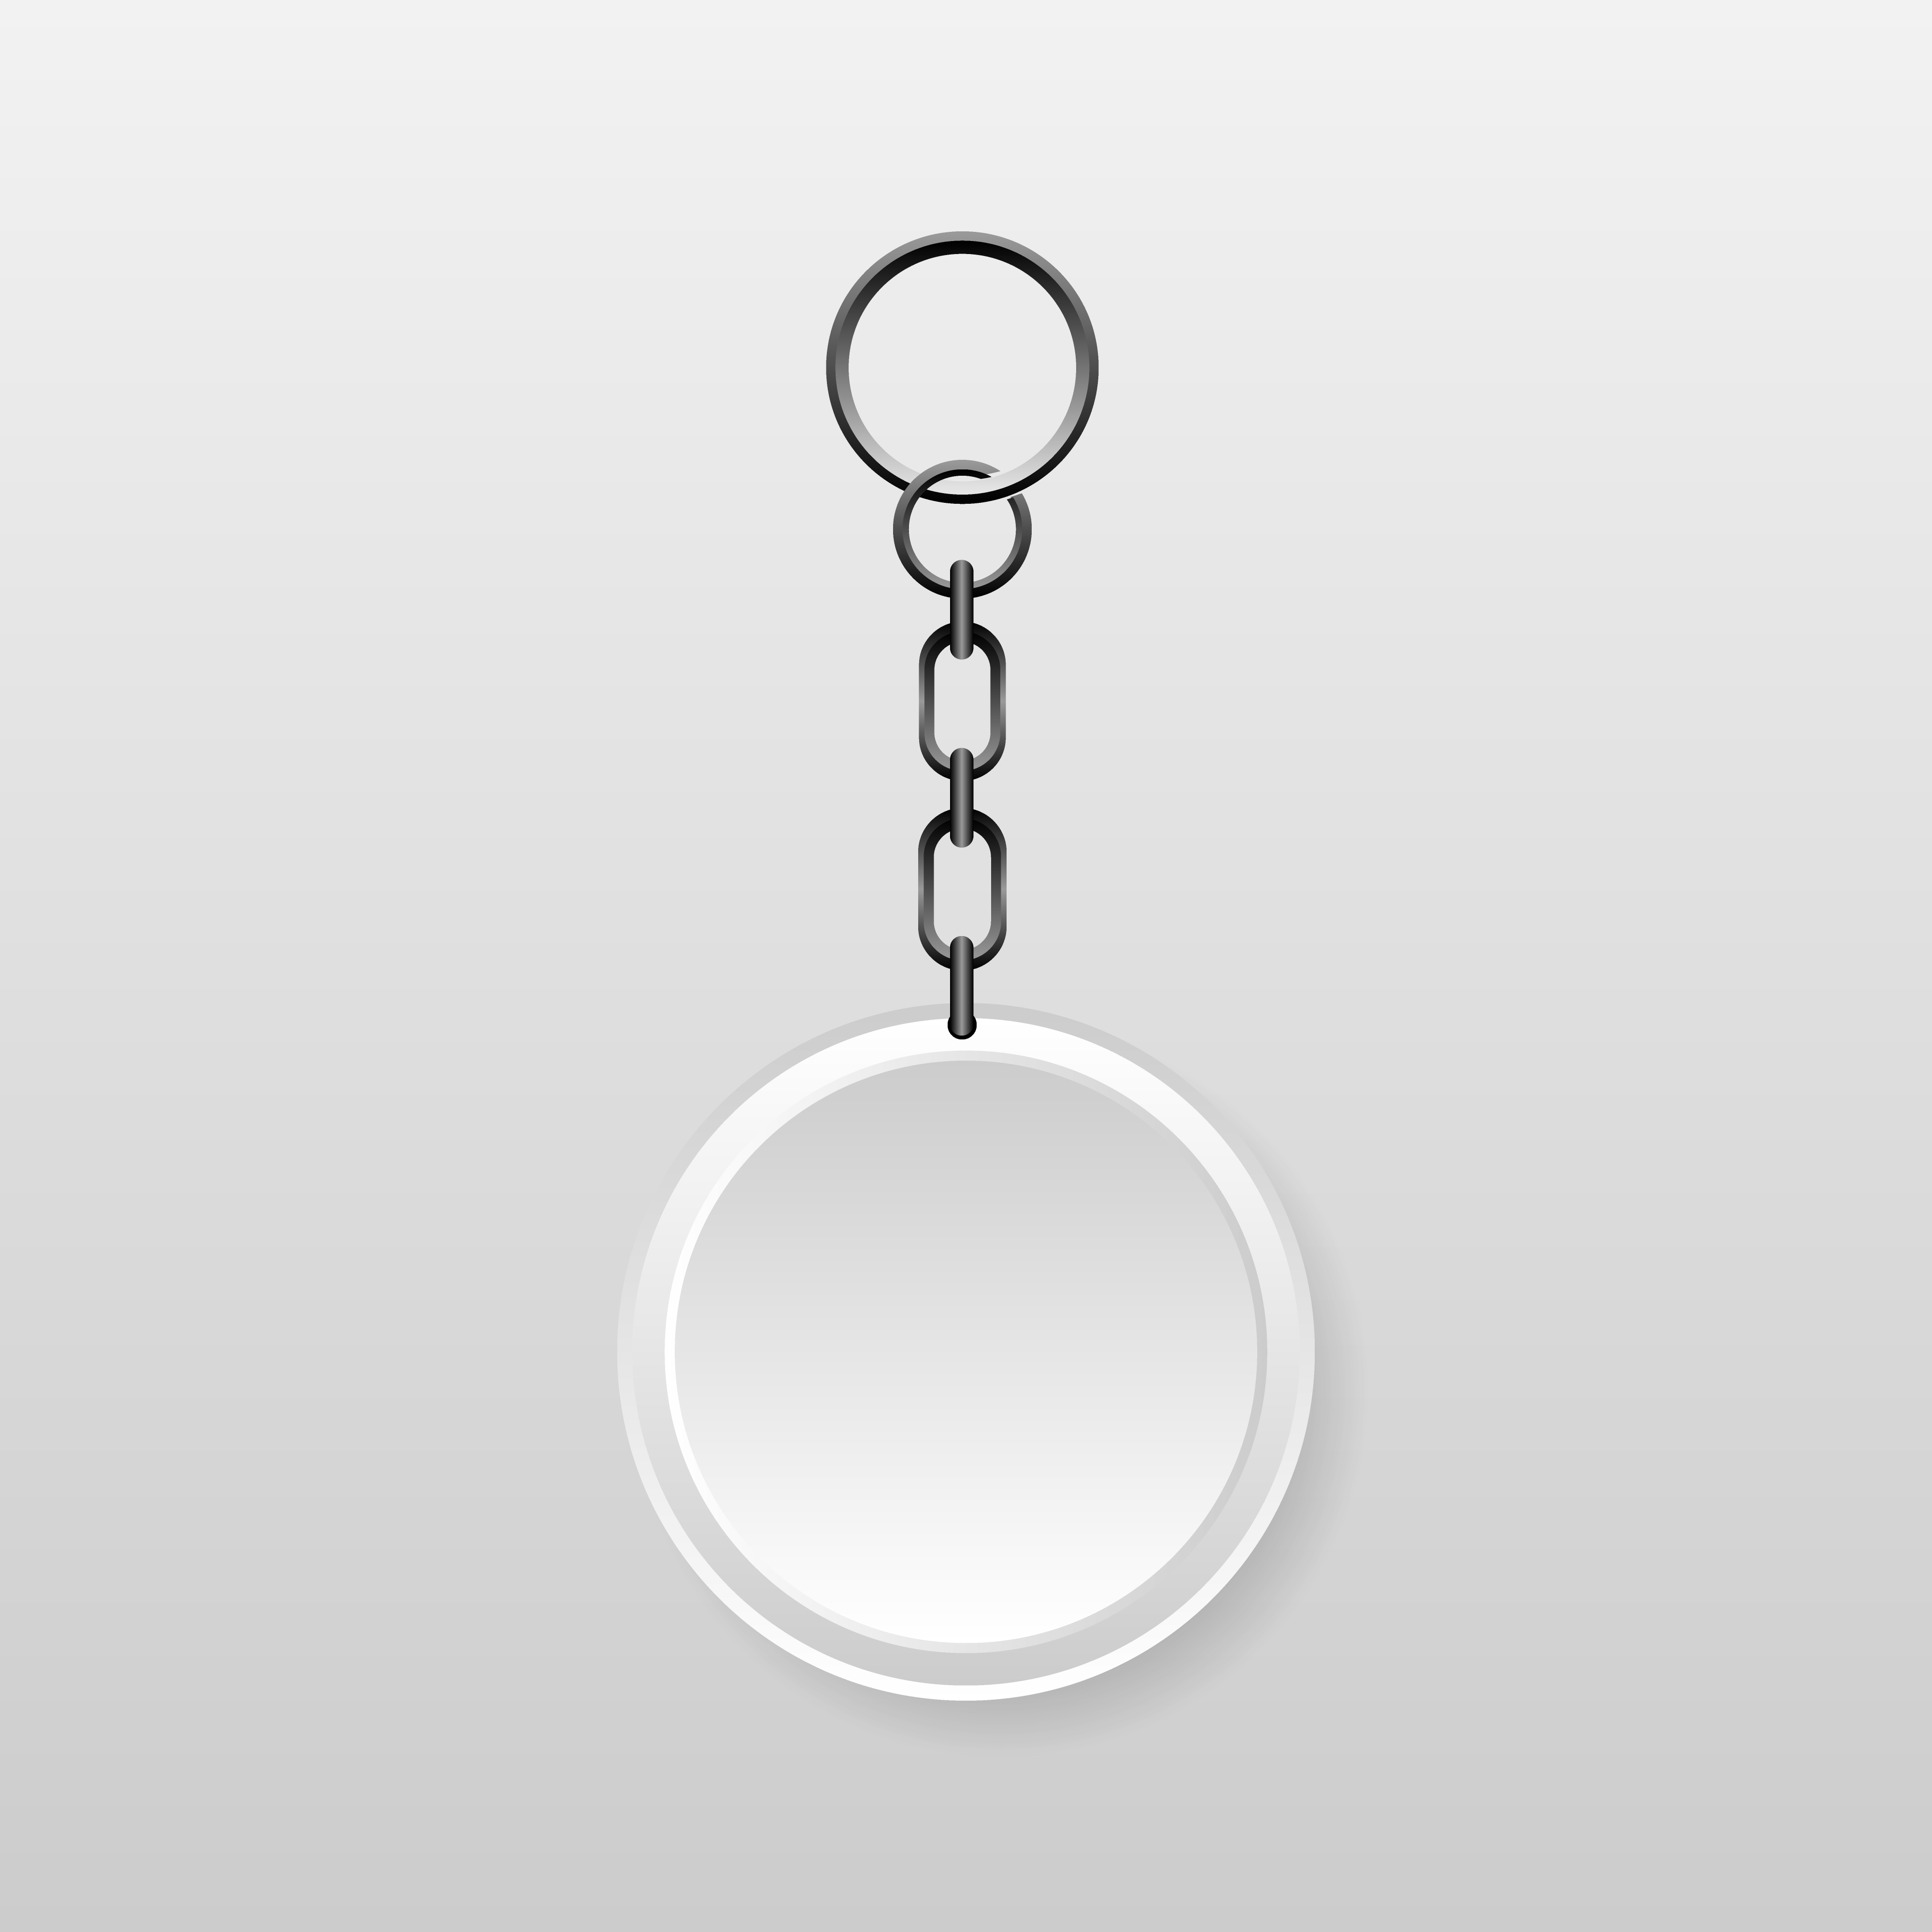 Download Realistic white blank keychain mockup - Download Free Vectors, Clipart Graphics & Vector Art